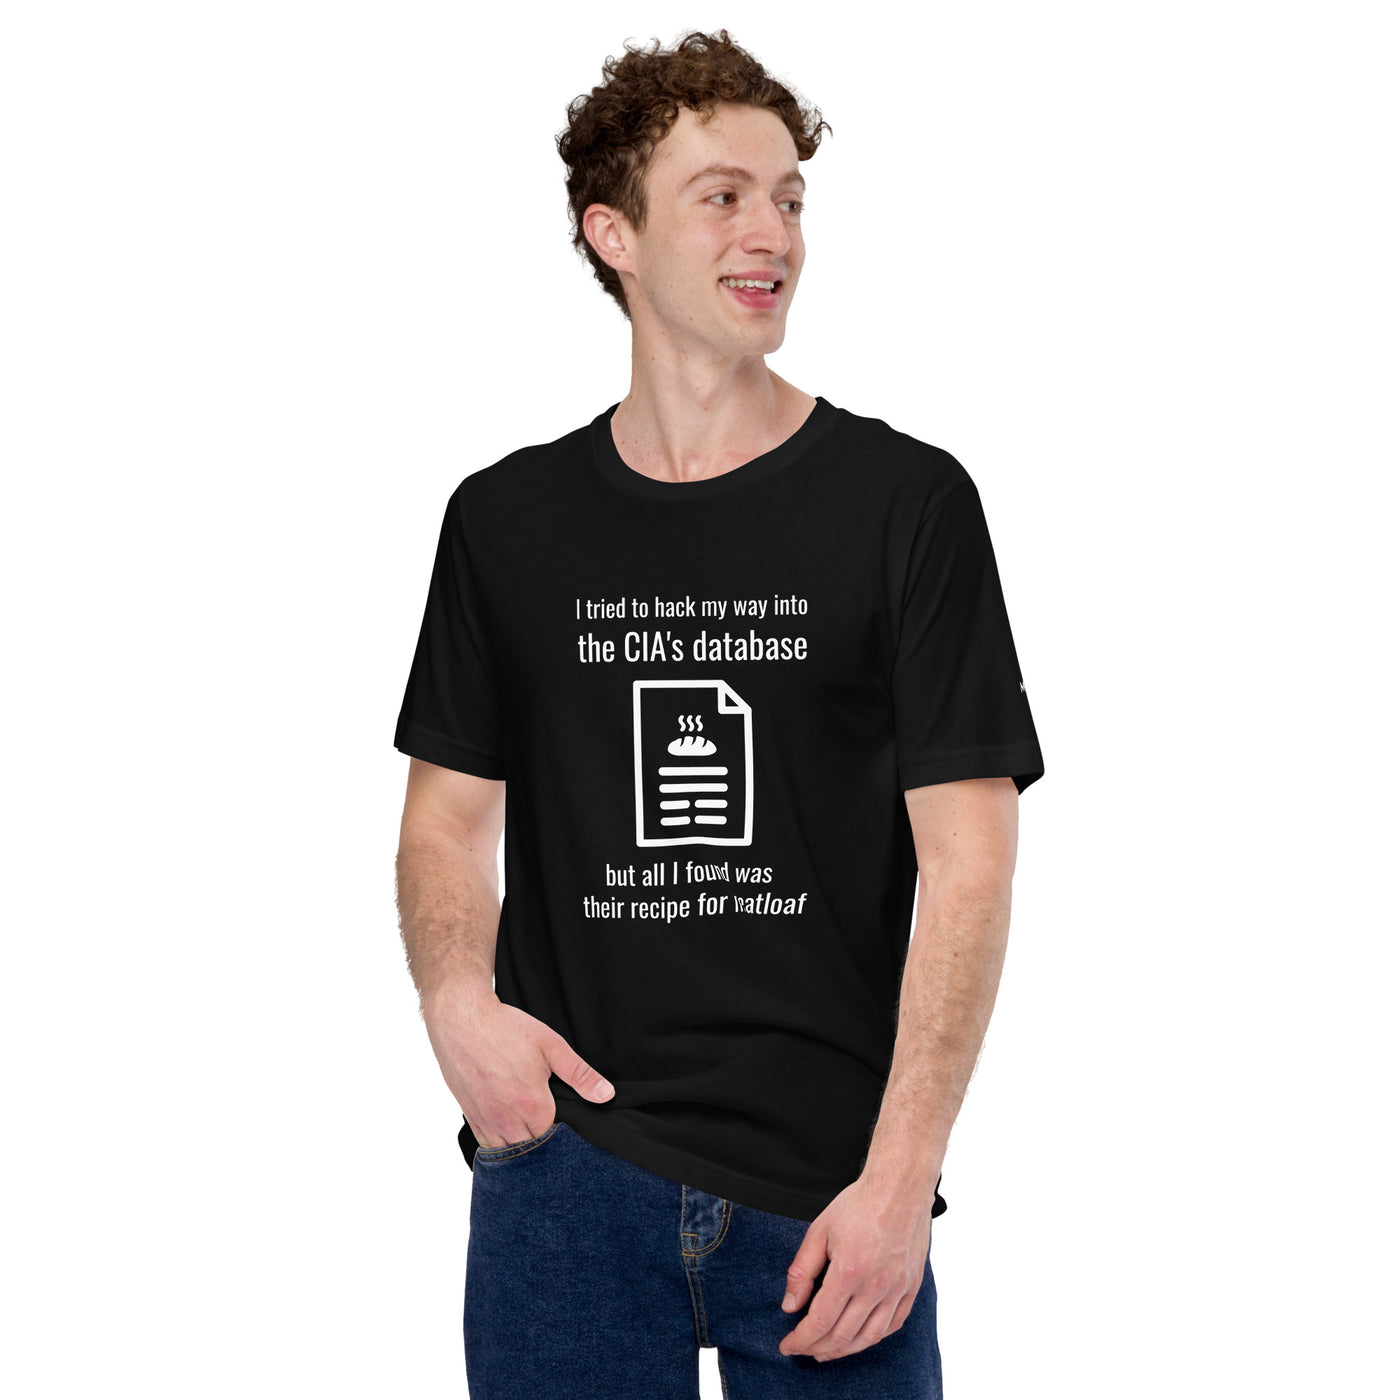 I tried to hack my way into the CIA's database - Unisex t-shirt